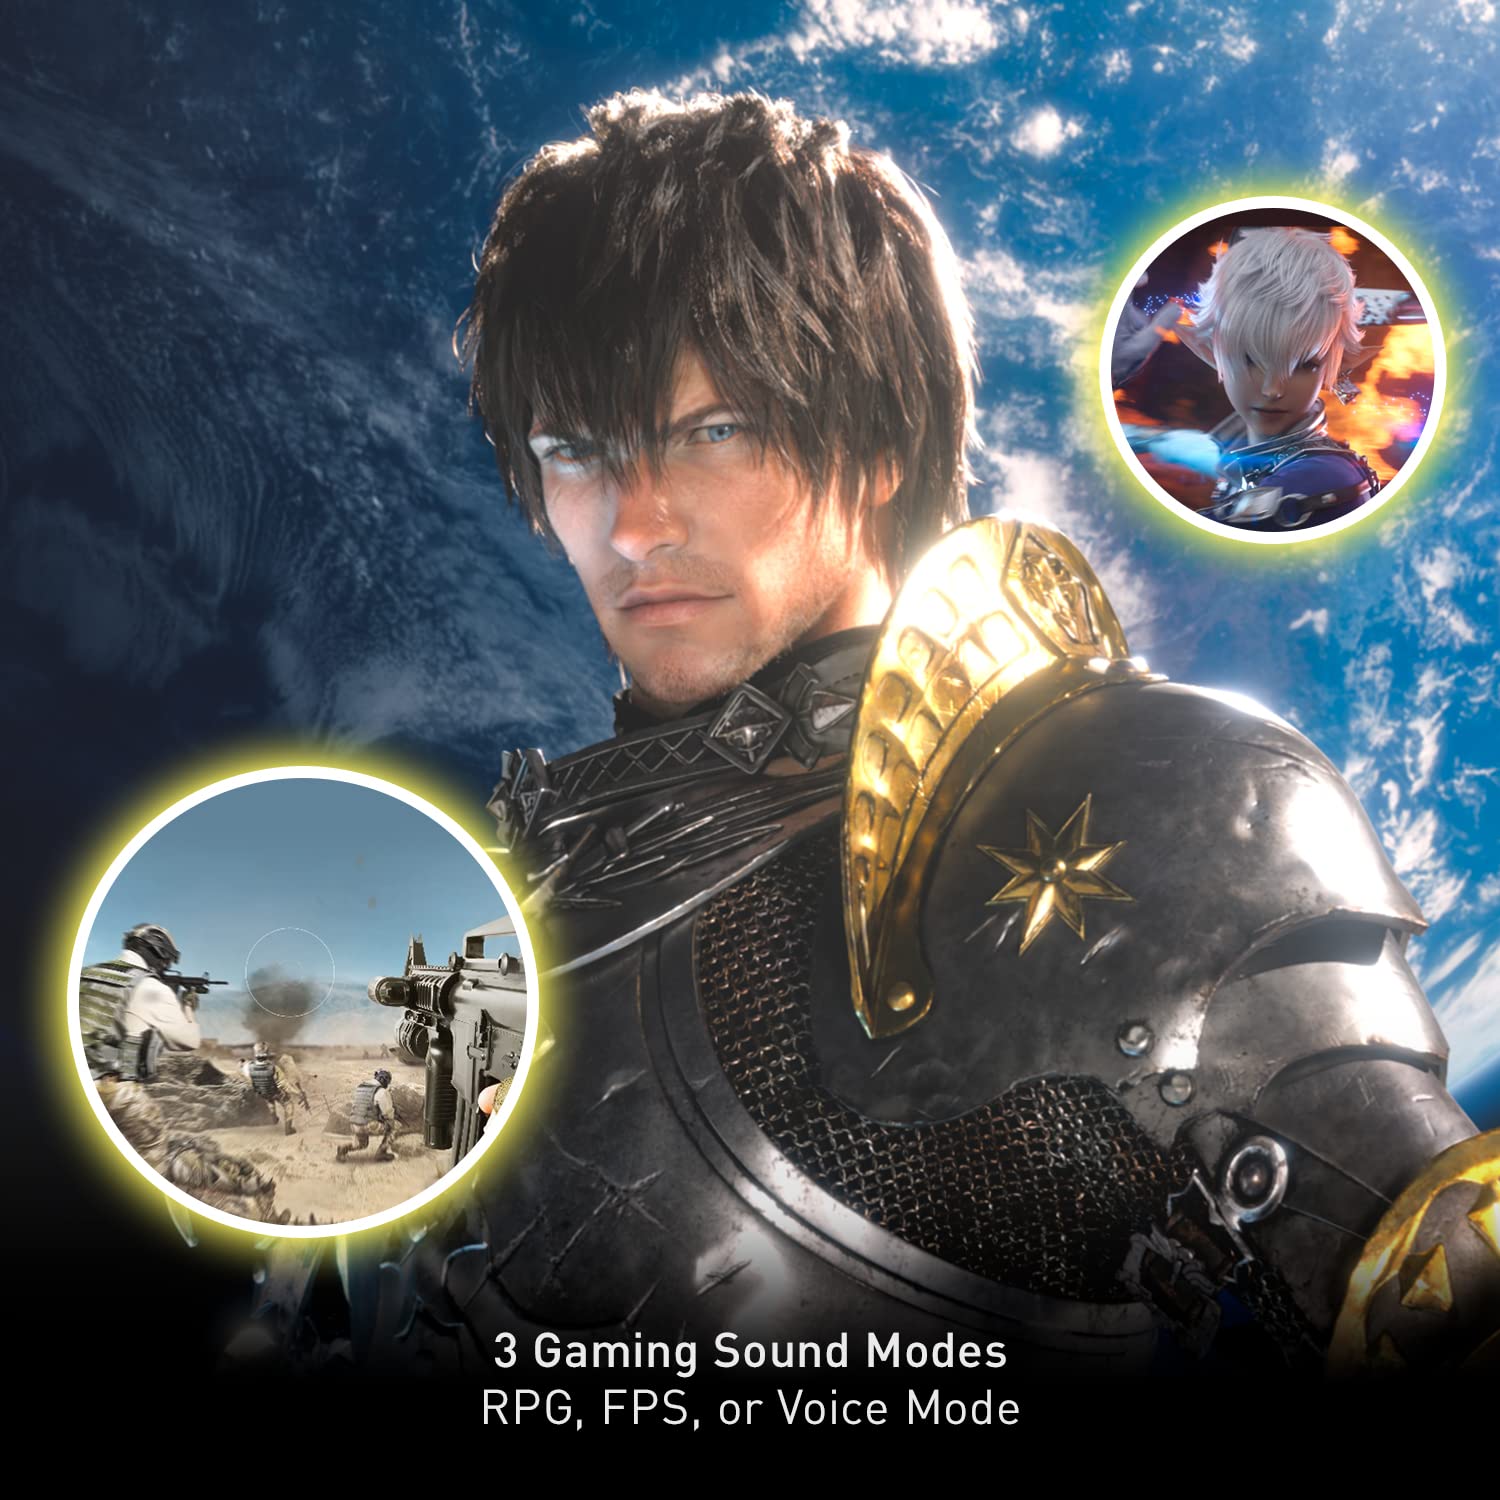 Panasonic SoundSlayer Final Fantasy XIV Online Edition Wearable Gaming Speaker, Lightweight Wired Neck Speaker with Built-in Microphone and Dimensional Sound - SC-GN01PPFF (Black)